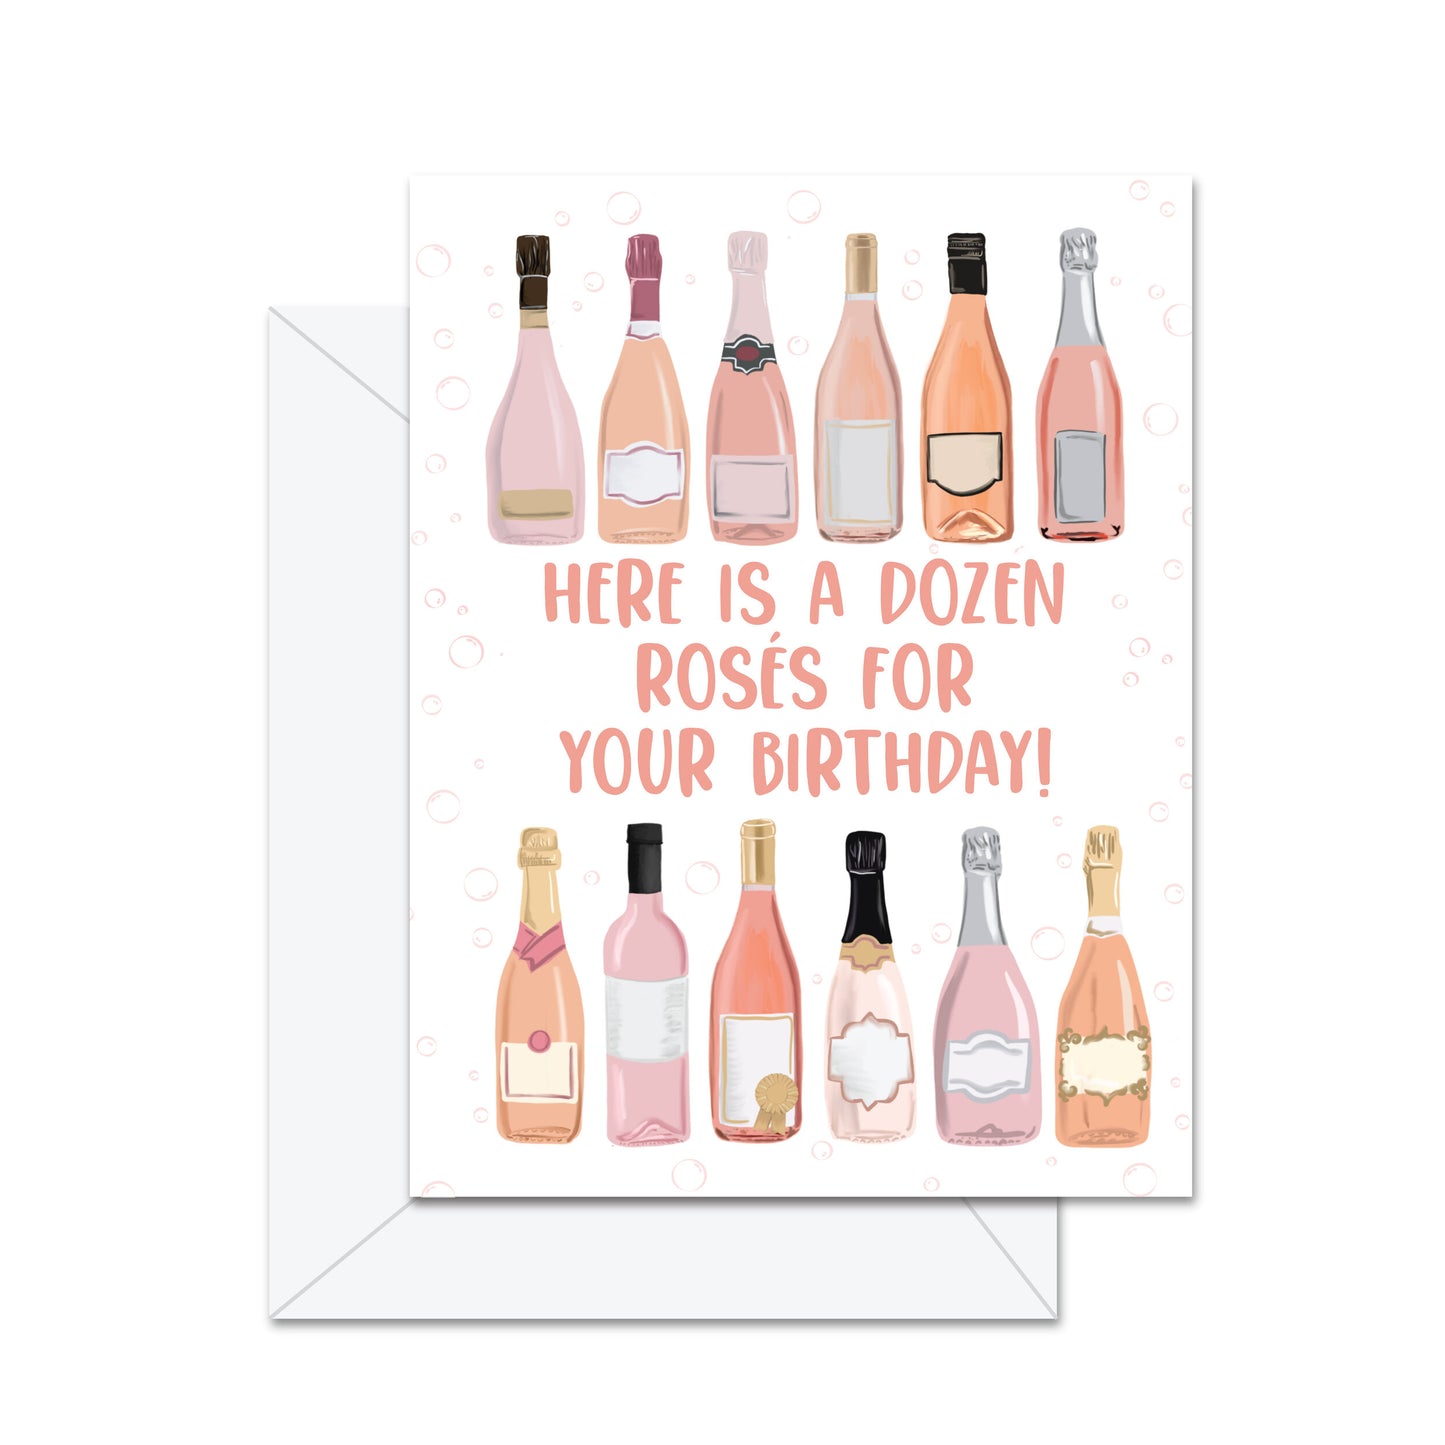 Here Is A Dozen Roses For Your Birthday! - Greeting Card